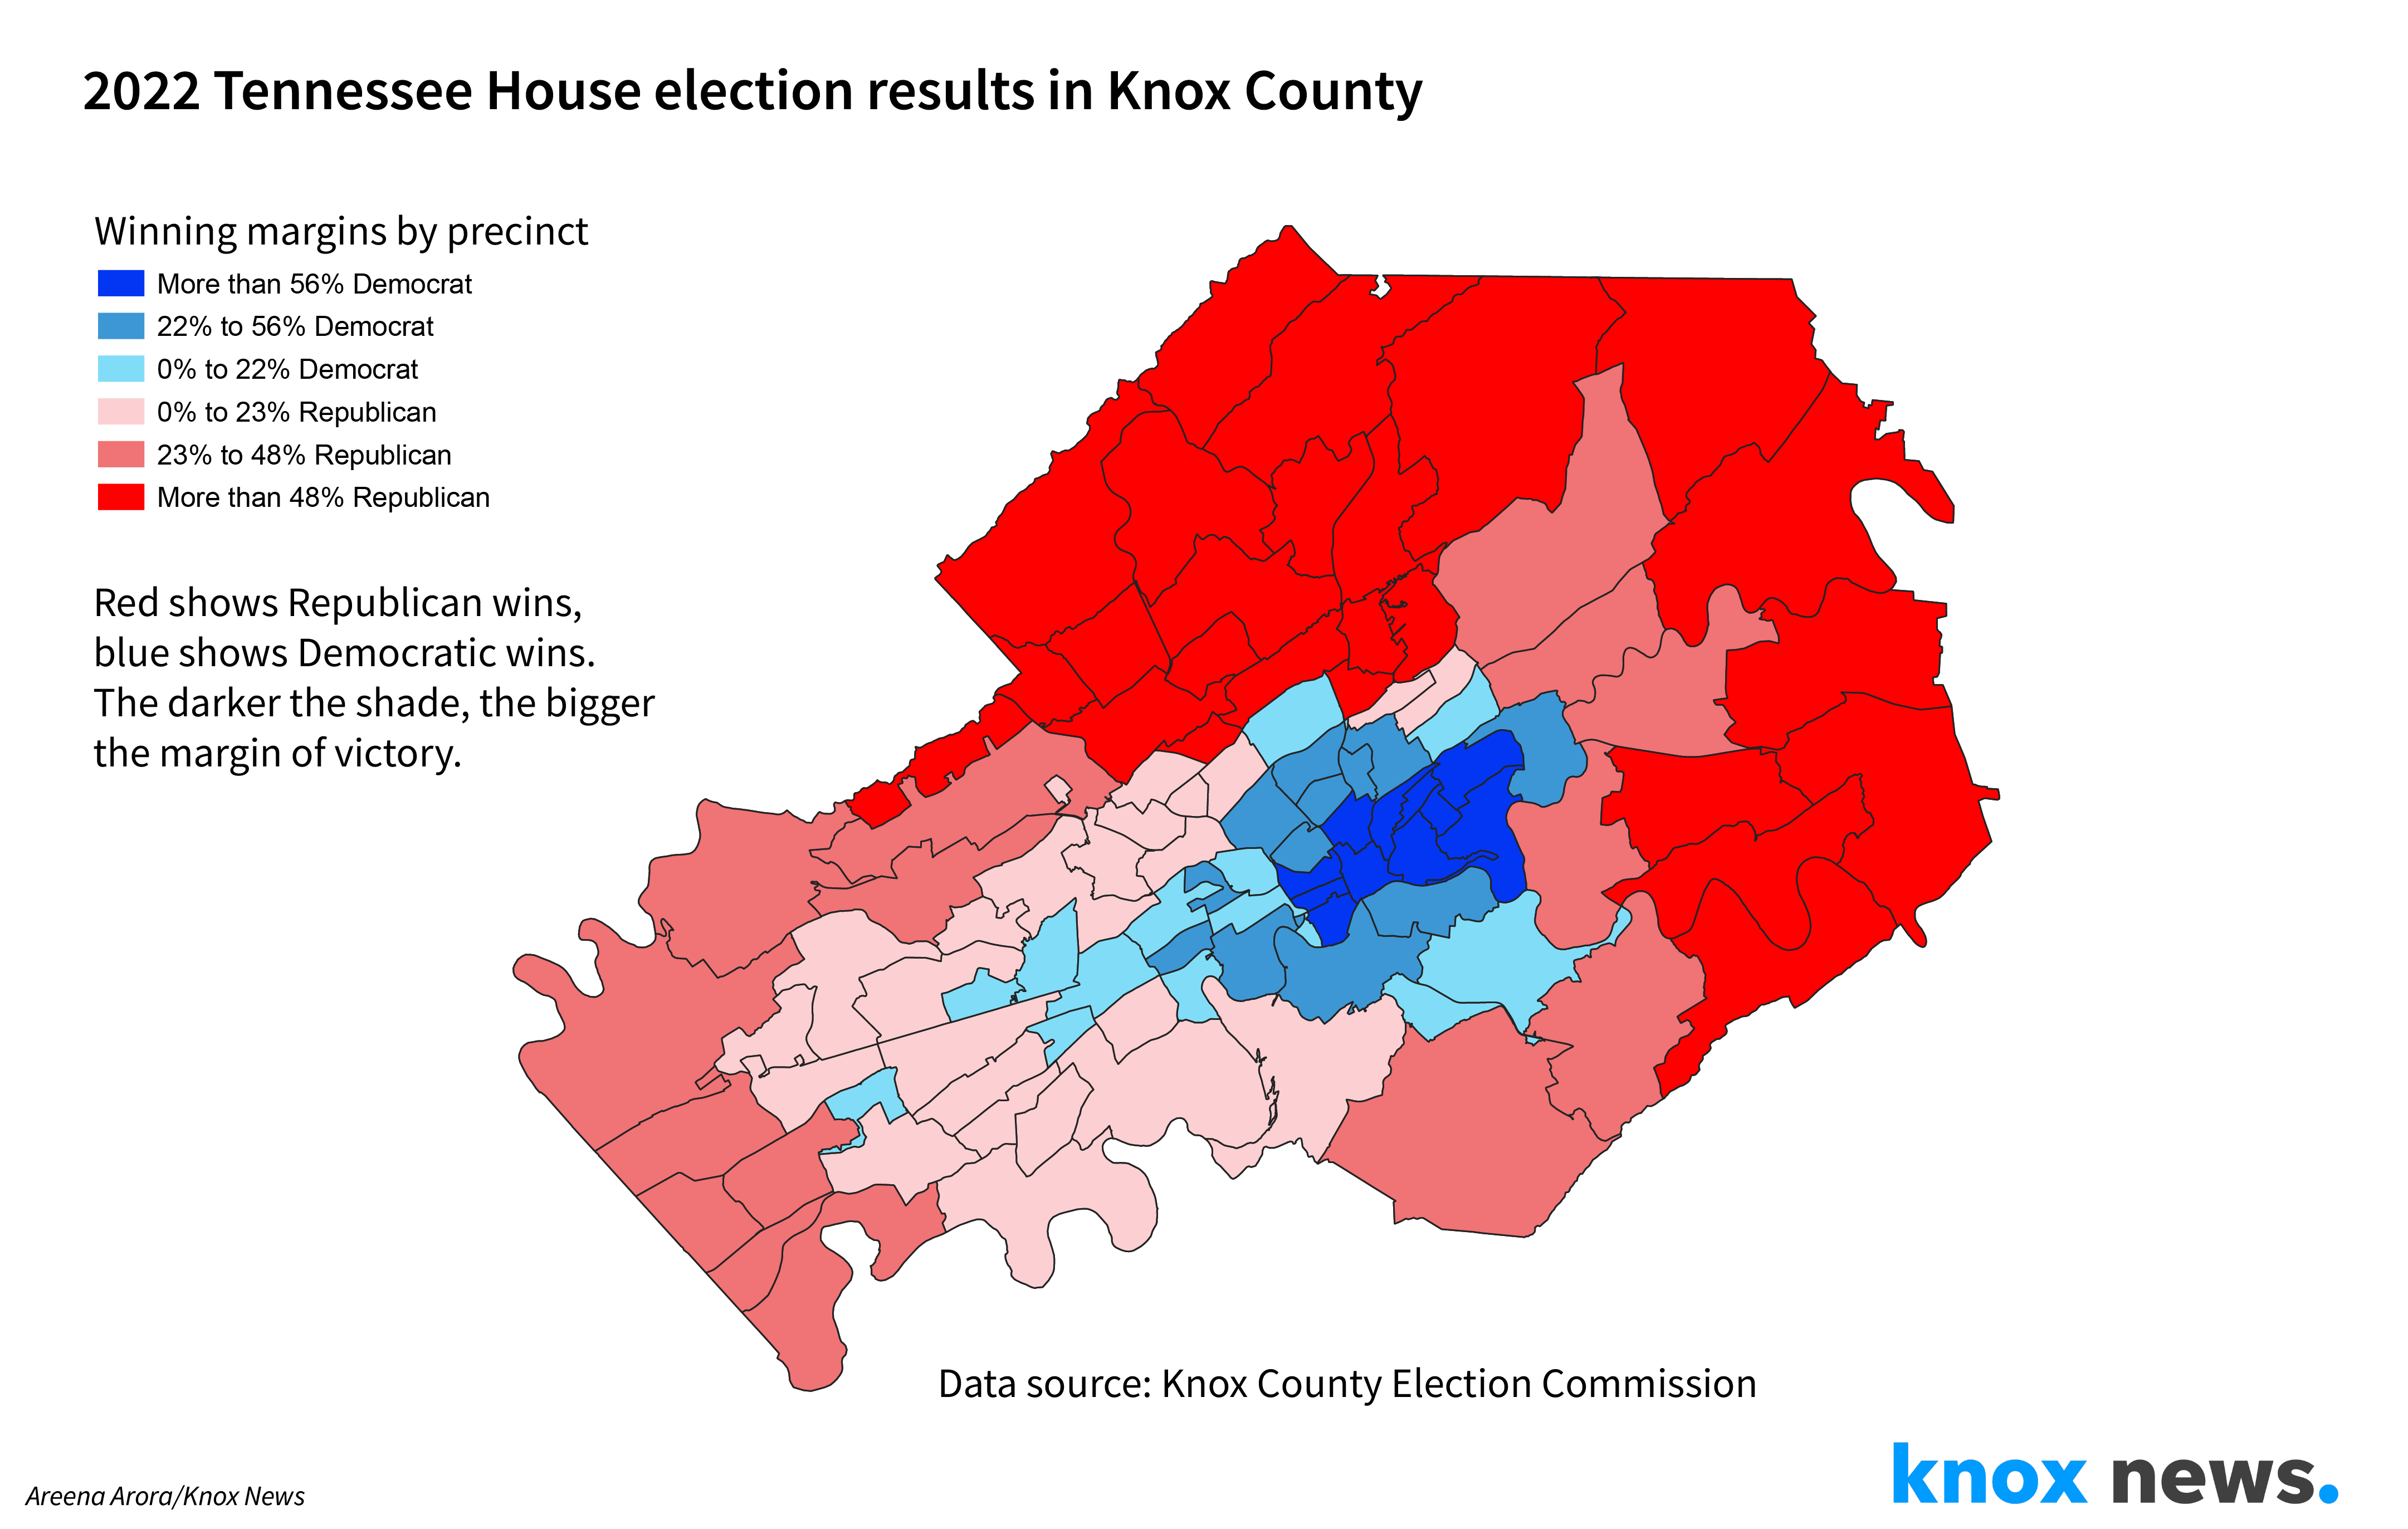 Knox County has always been reliably Republican, but in recent elections Democrats have made gains.